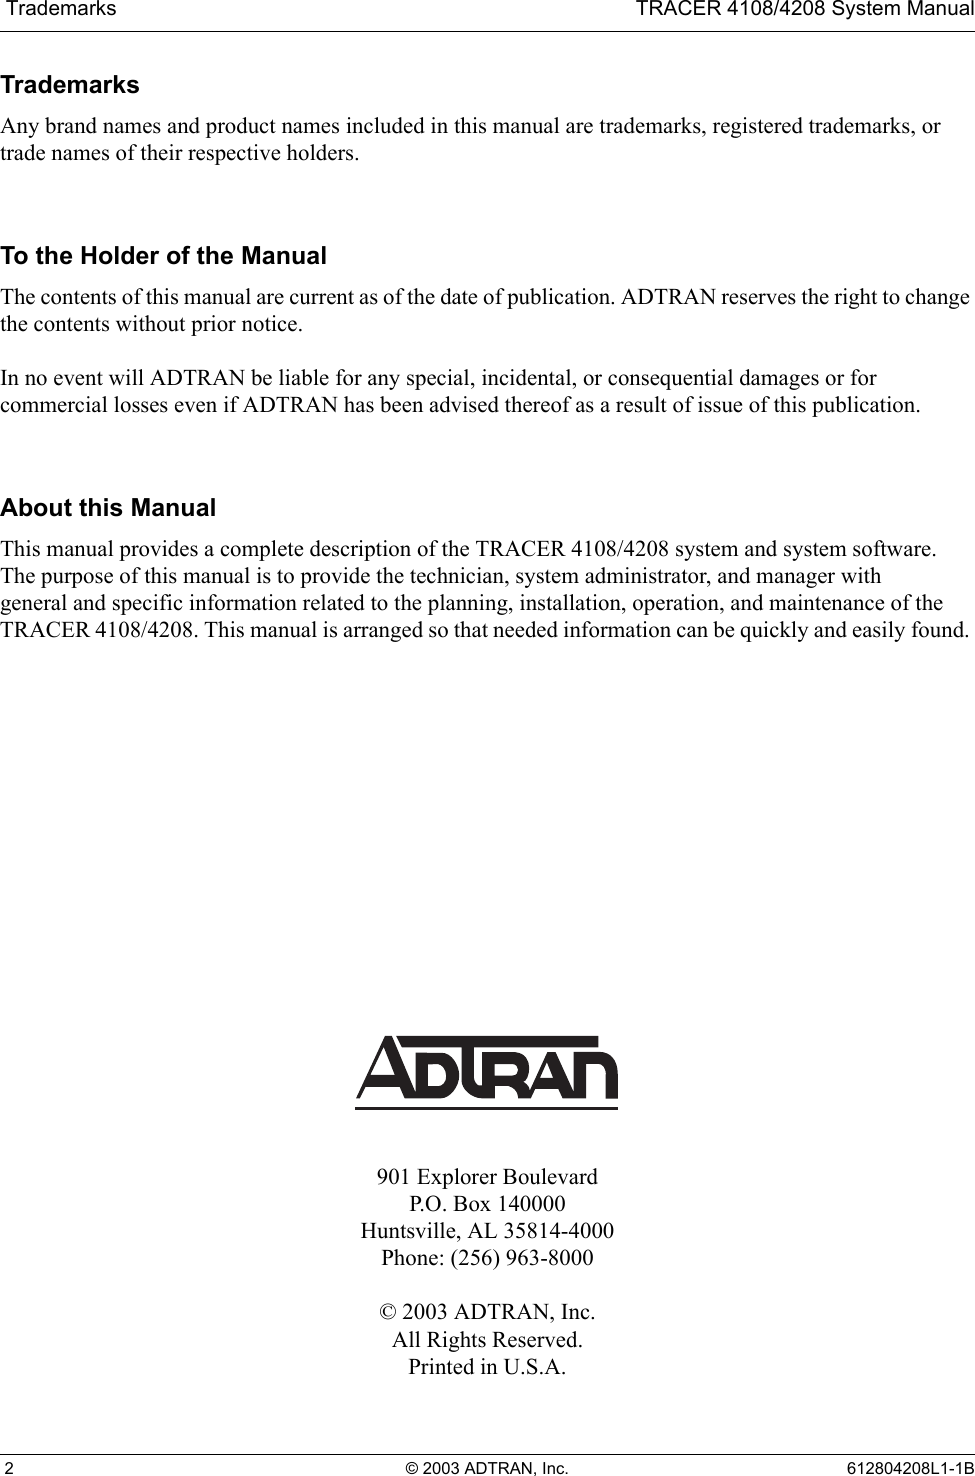  Trademarks TRACER 4108/4208 System Manual 2 © 2003 ADTRAN, Inc. 612804208L1-1BTrademarksAny brand names and product names included in this manual are trademarks, registered trademarks, or trade names of their respective holders.To the Holder of the ManualThe contents of this manual are current as of the date of publication. ADTRAN reserves the right to change the contents without prior notice.In no event will ADTRAN be liable for any special, incidental, or consequential damages or for commercial losses even if ADTRAN has been advised thereof as a result of issue of this publication.About this ManualThis manual provides a complete description of the TRACER 4108/4208 system and system software.The purpose of this manual is to provide the technician, system administrator, and manager withgeneral and specific information related to the planning, installation, operation, and maintenance of the TRACER 4108/4208. This manual is arranged so that needed information can be quickly and easily found. 901 Explorer BoulevardP.O. Box 140000Huntsville, AL 35814-4000Phone: (256) 963-8000© 2003 ADTRAN, Inc.All Rights Reserved.Printed in U.S.A.